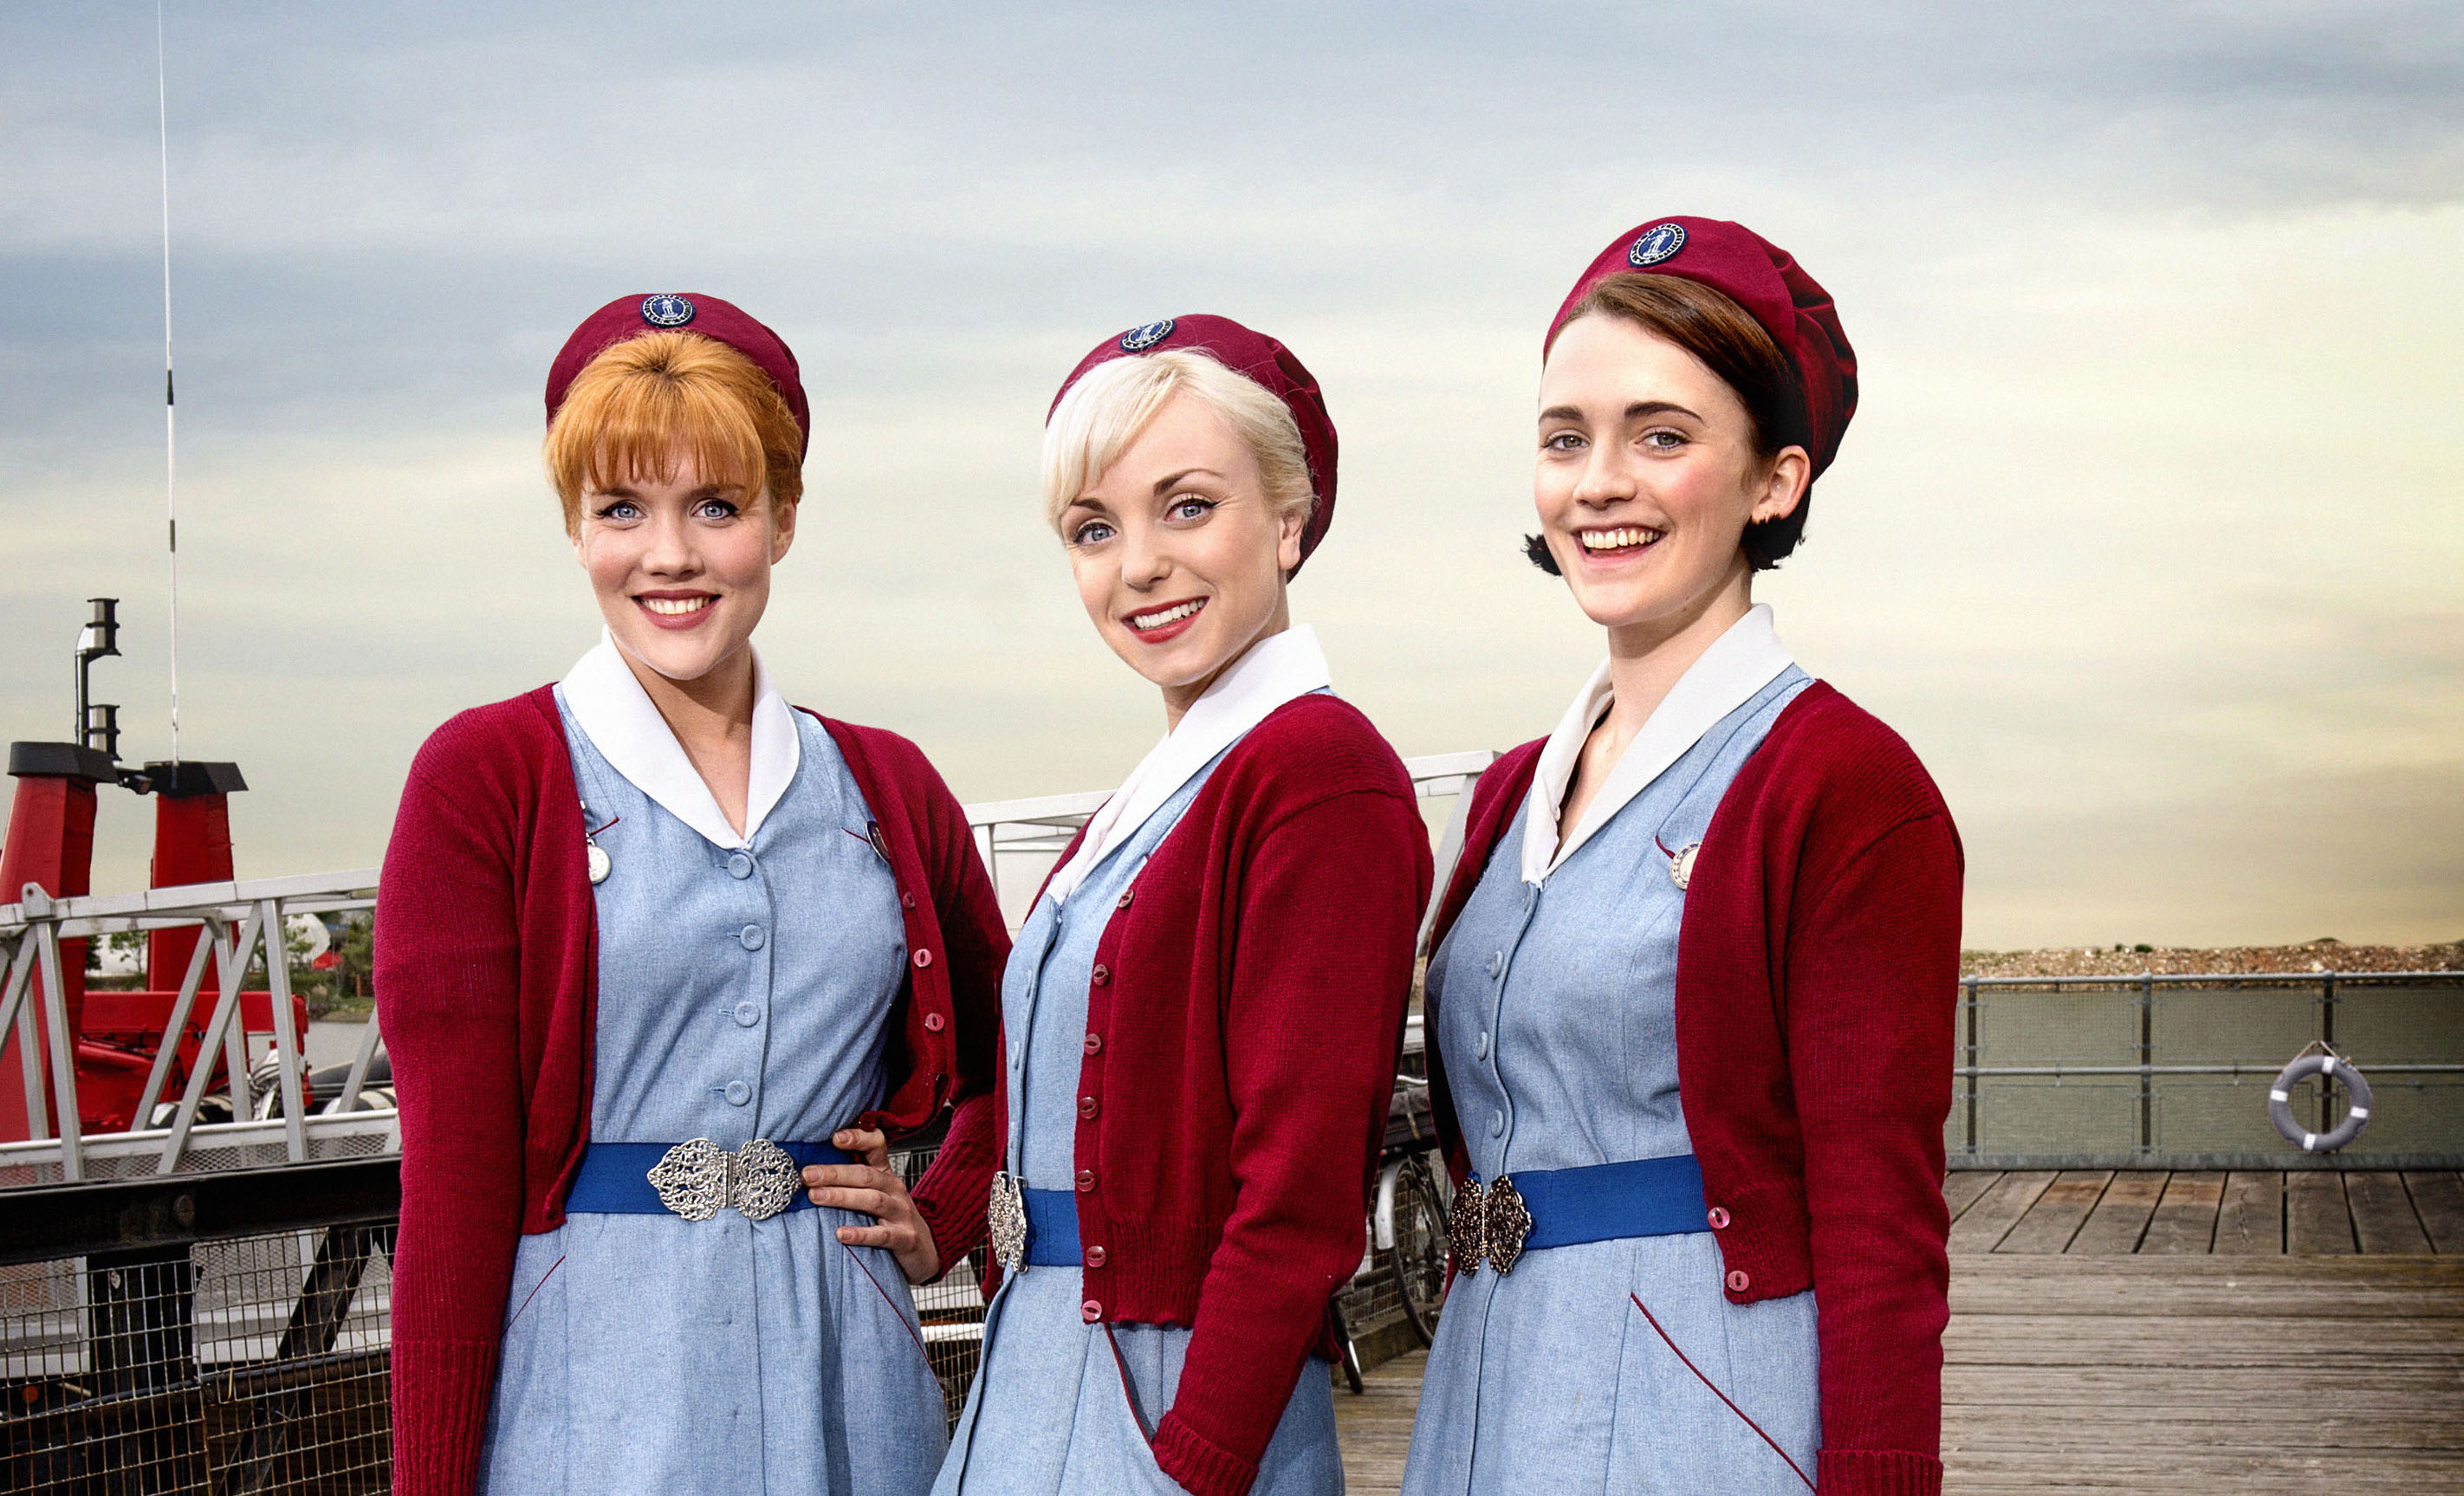 Call the Midwife' Recap: Series 5 Episode 1 | Telly Visions